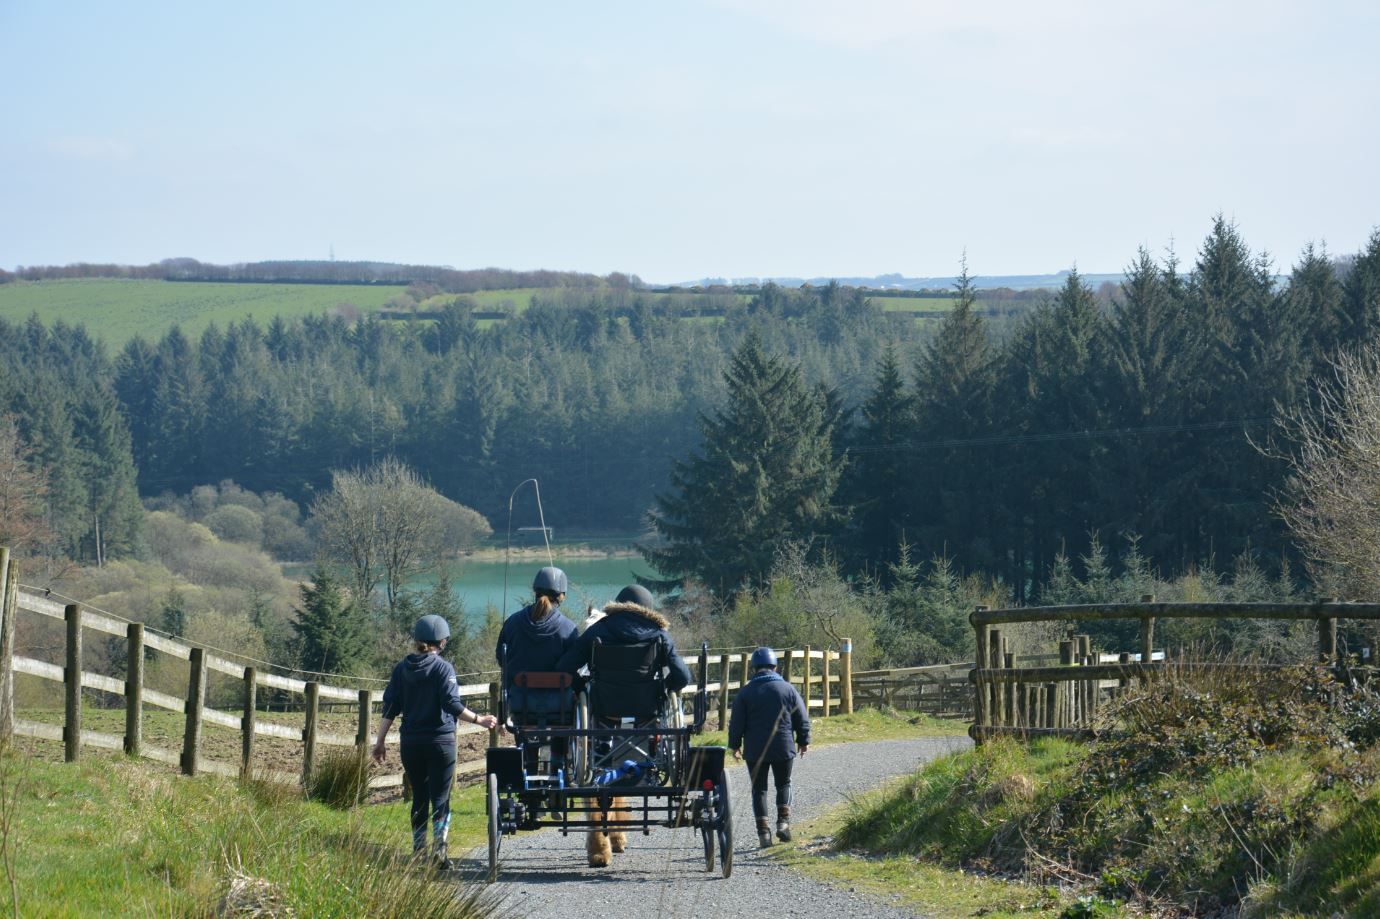 The horse-drawn carriage at Calvert Trust